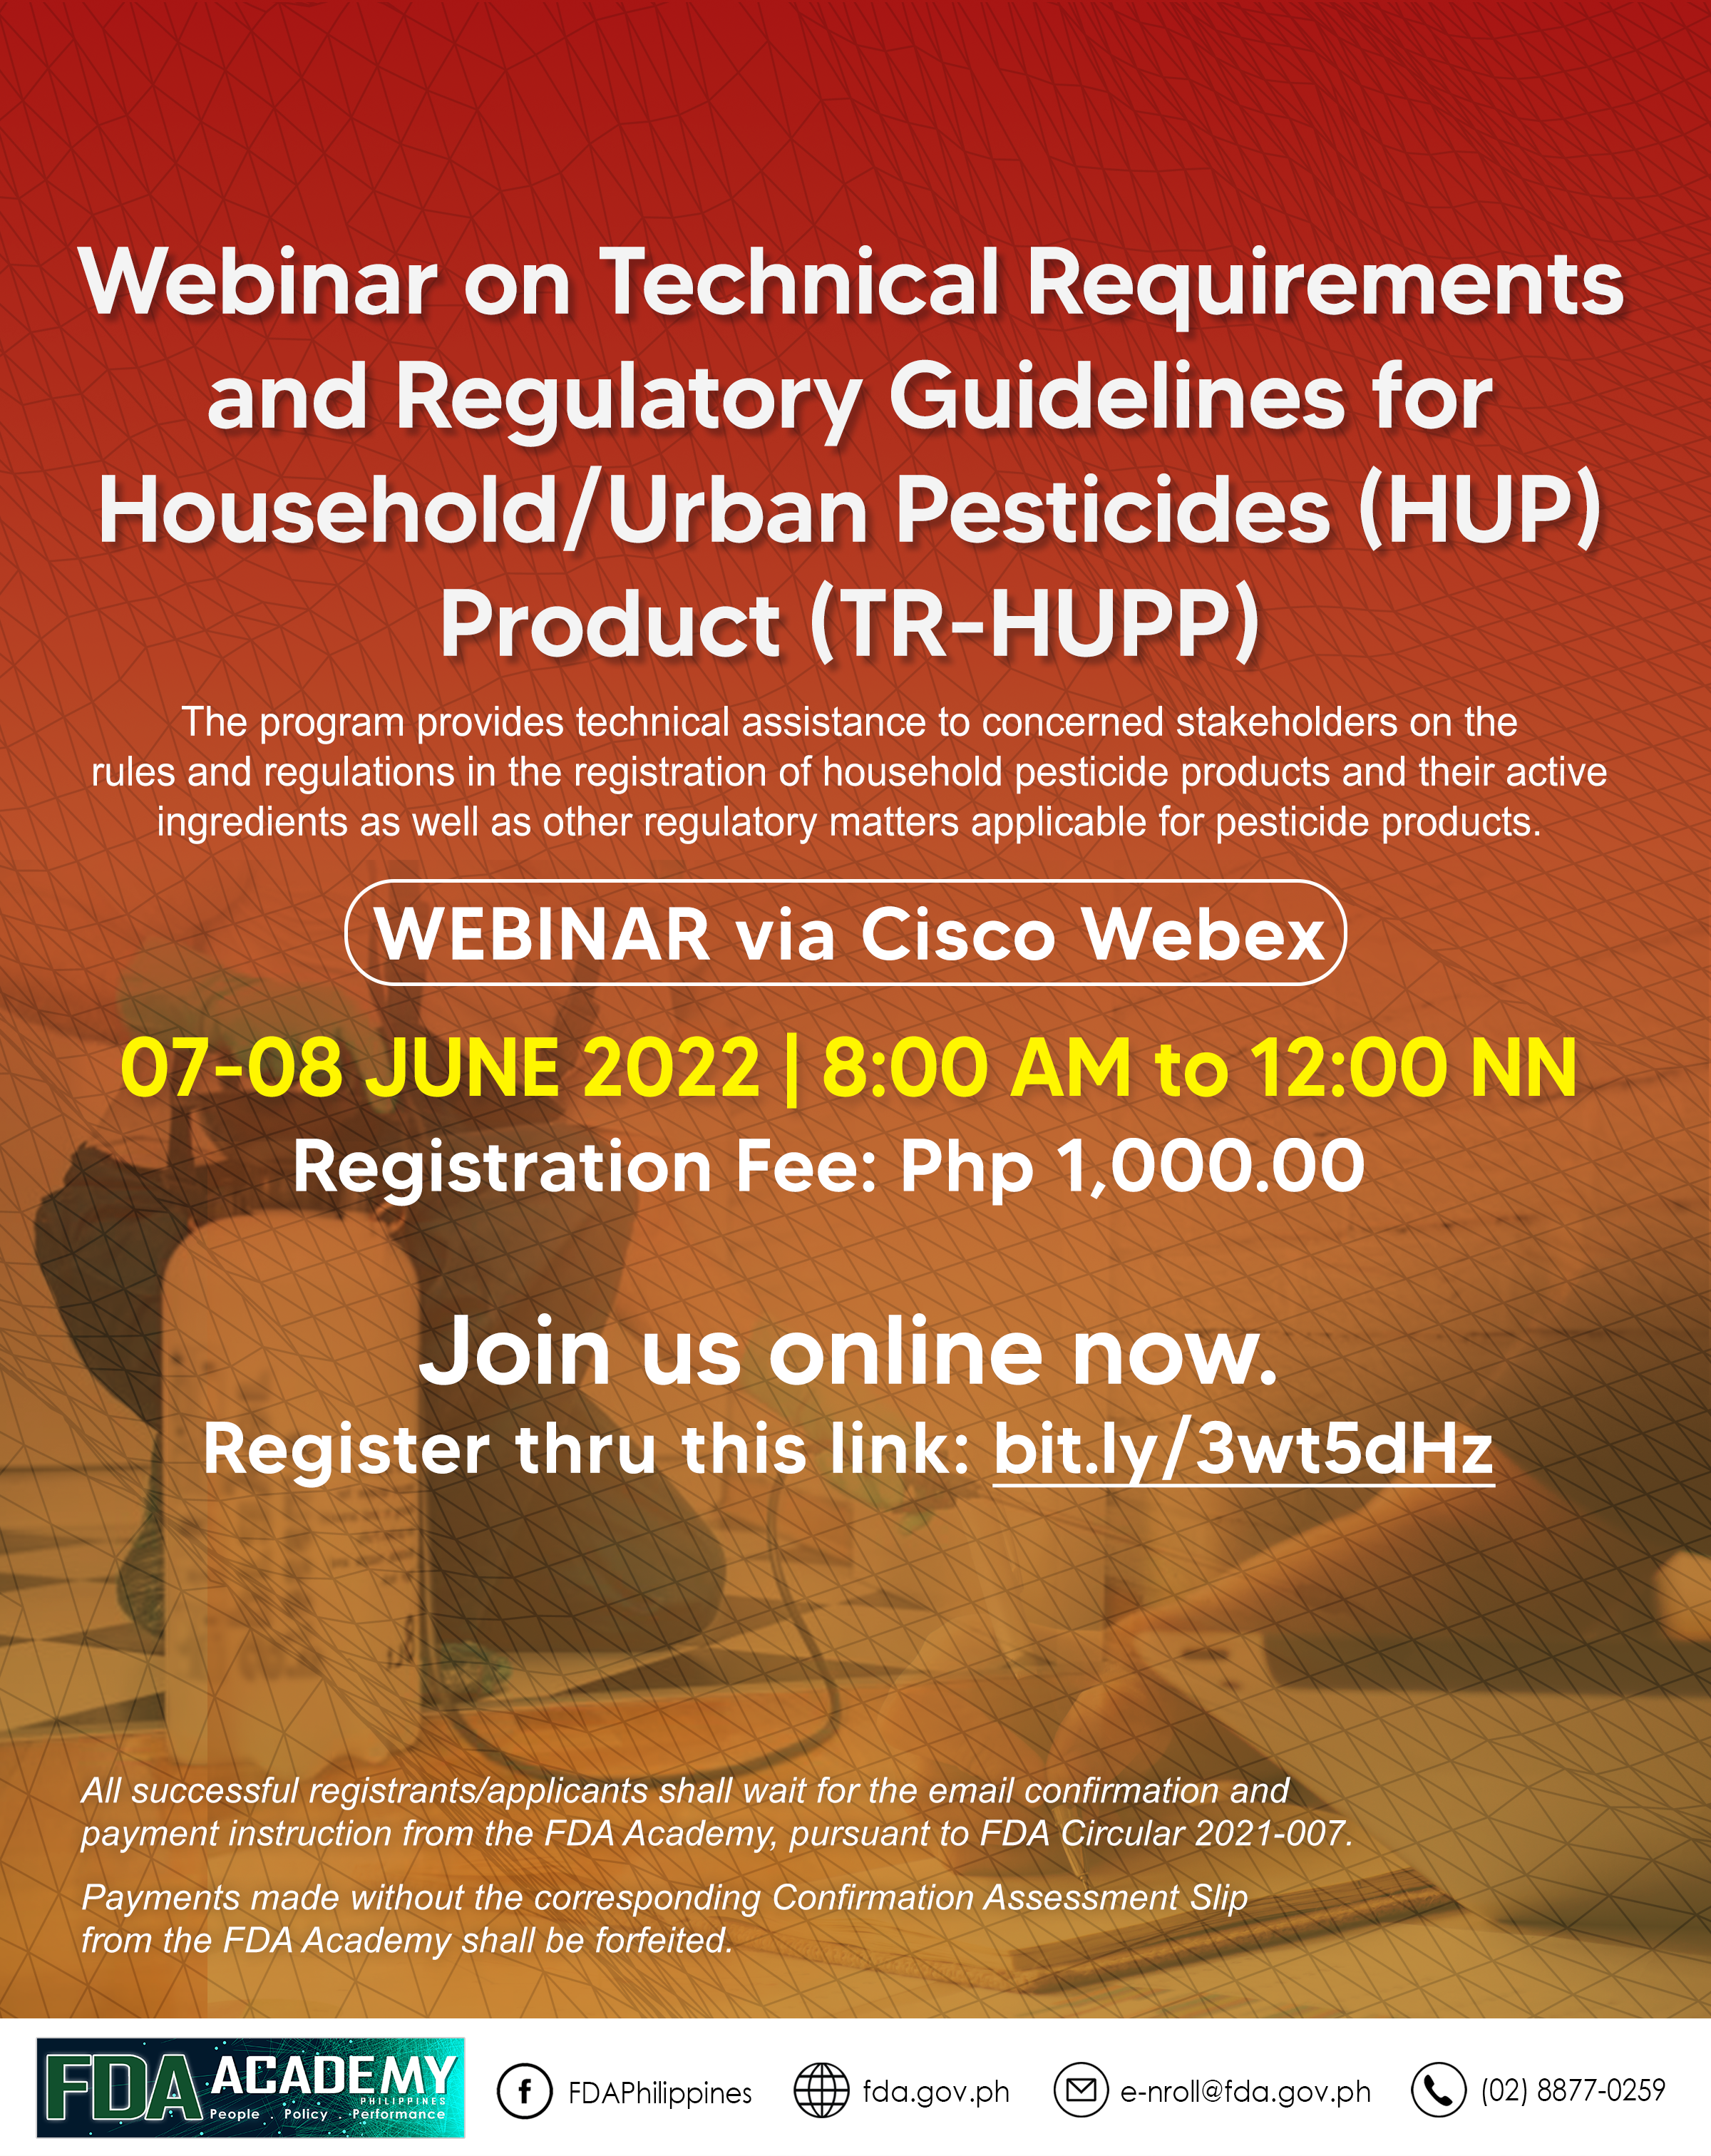 Announcement || WEBINAR ON TECHNICAL REQUIREMENTS AND REGULATORY GUIDELINES FOR HOUSEHOLD/URBAN PESTICIDES (HUP) PRODUCTS (TR-HUPP)